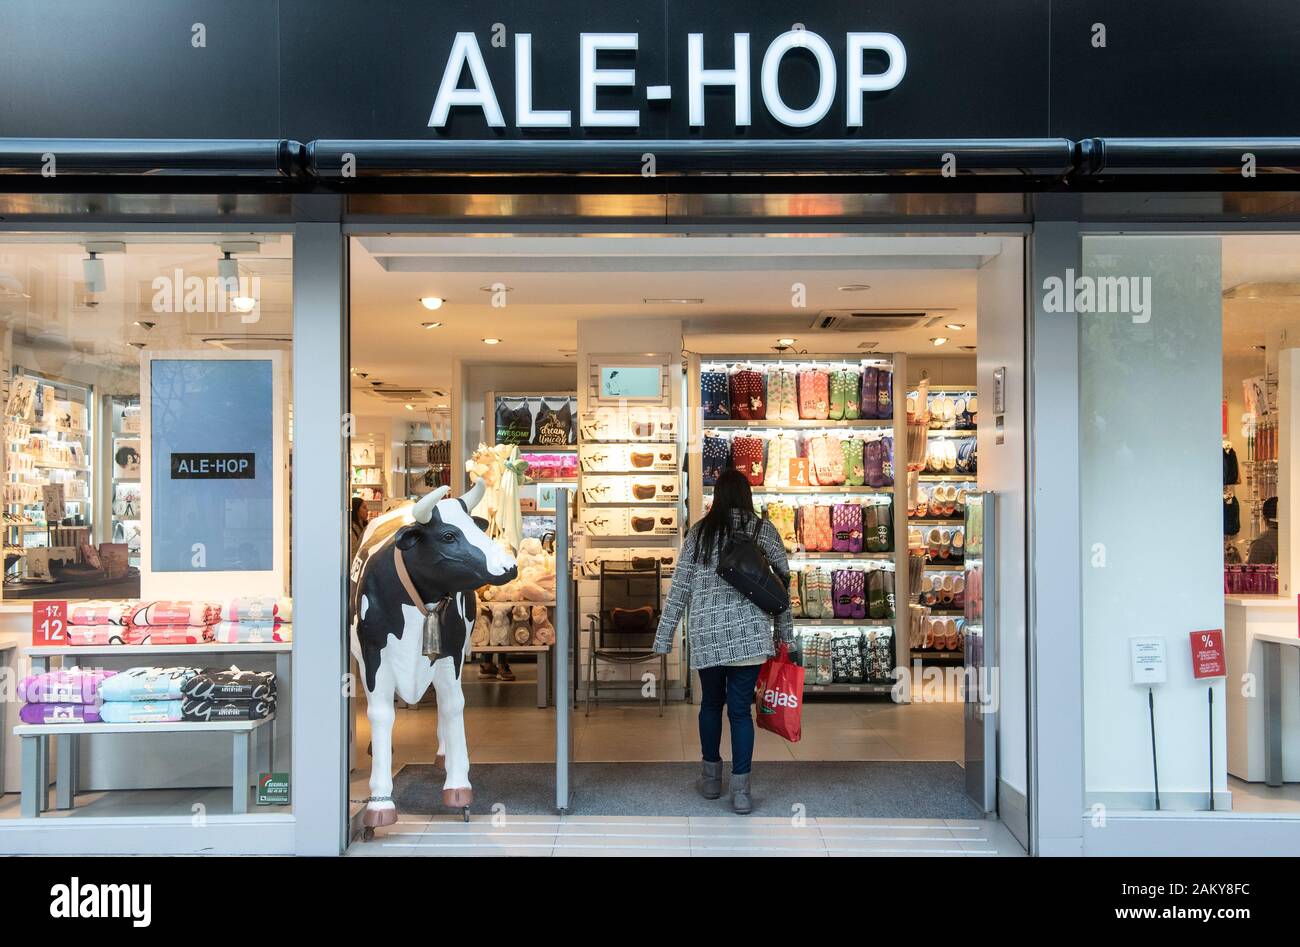 Ale hop shop in spain hi-res stock photography and images - Alamy